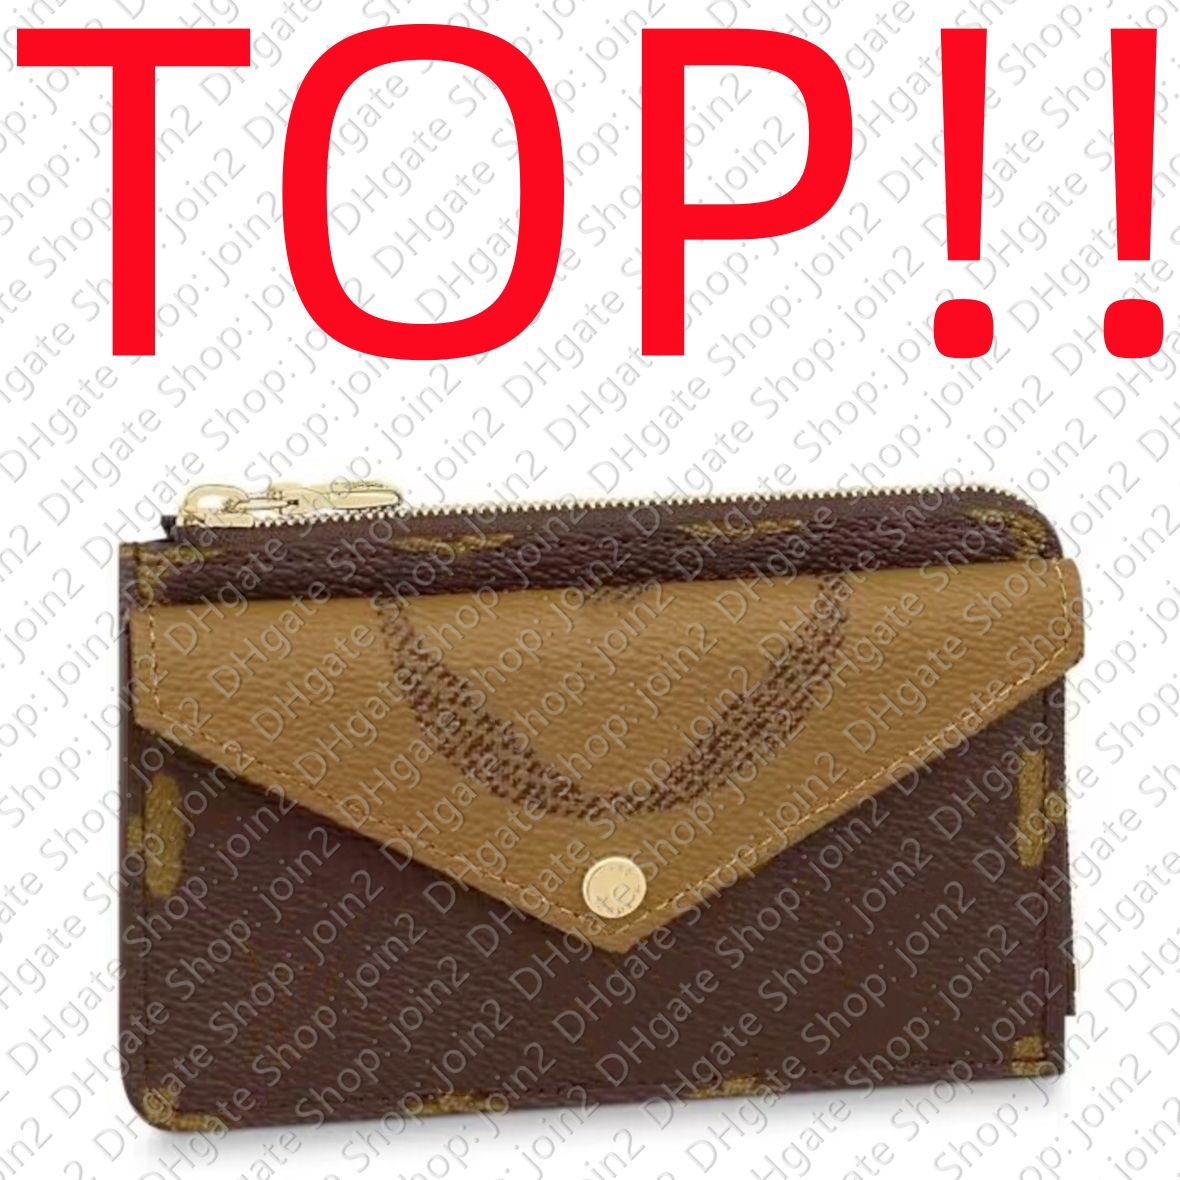 TOP. M69431 CARD HOLDER RECTO VERSO Designer Womens Mini Zippy Organizer Wallet  Coin Purse Bag Belt Charm Key Pouch Pochette Accessoires From Join2, $69.42